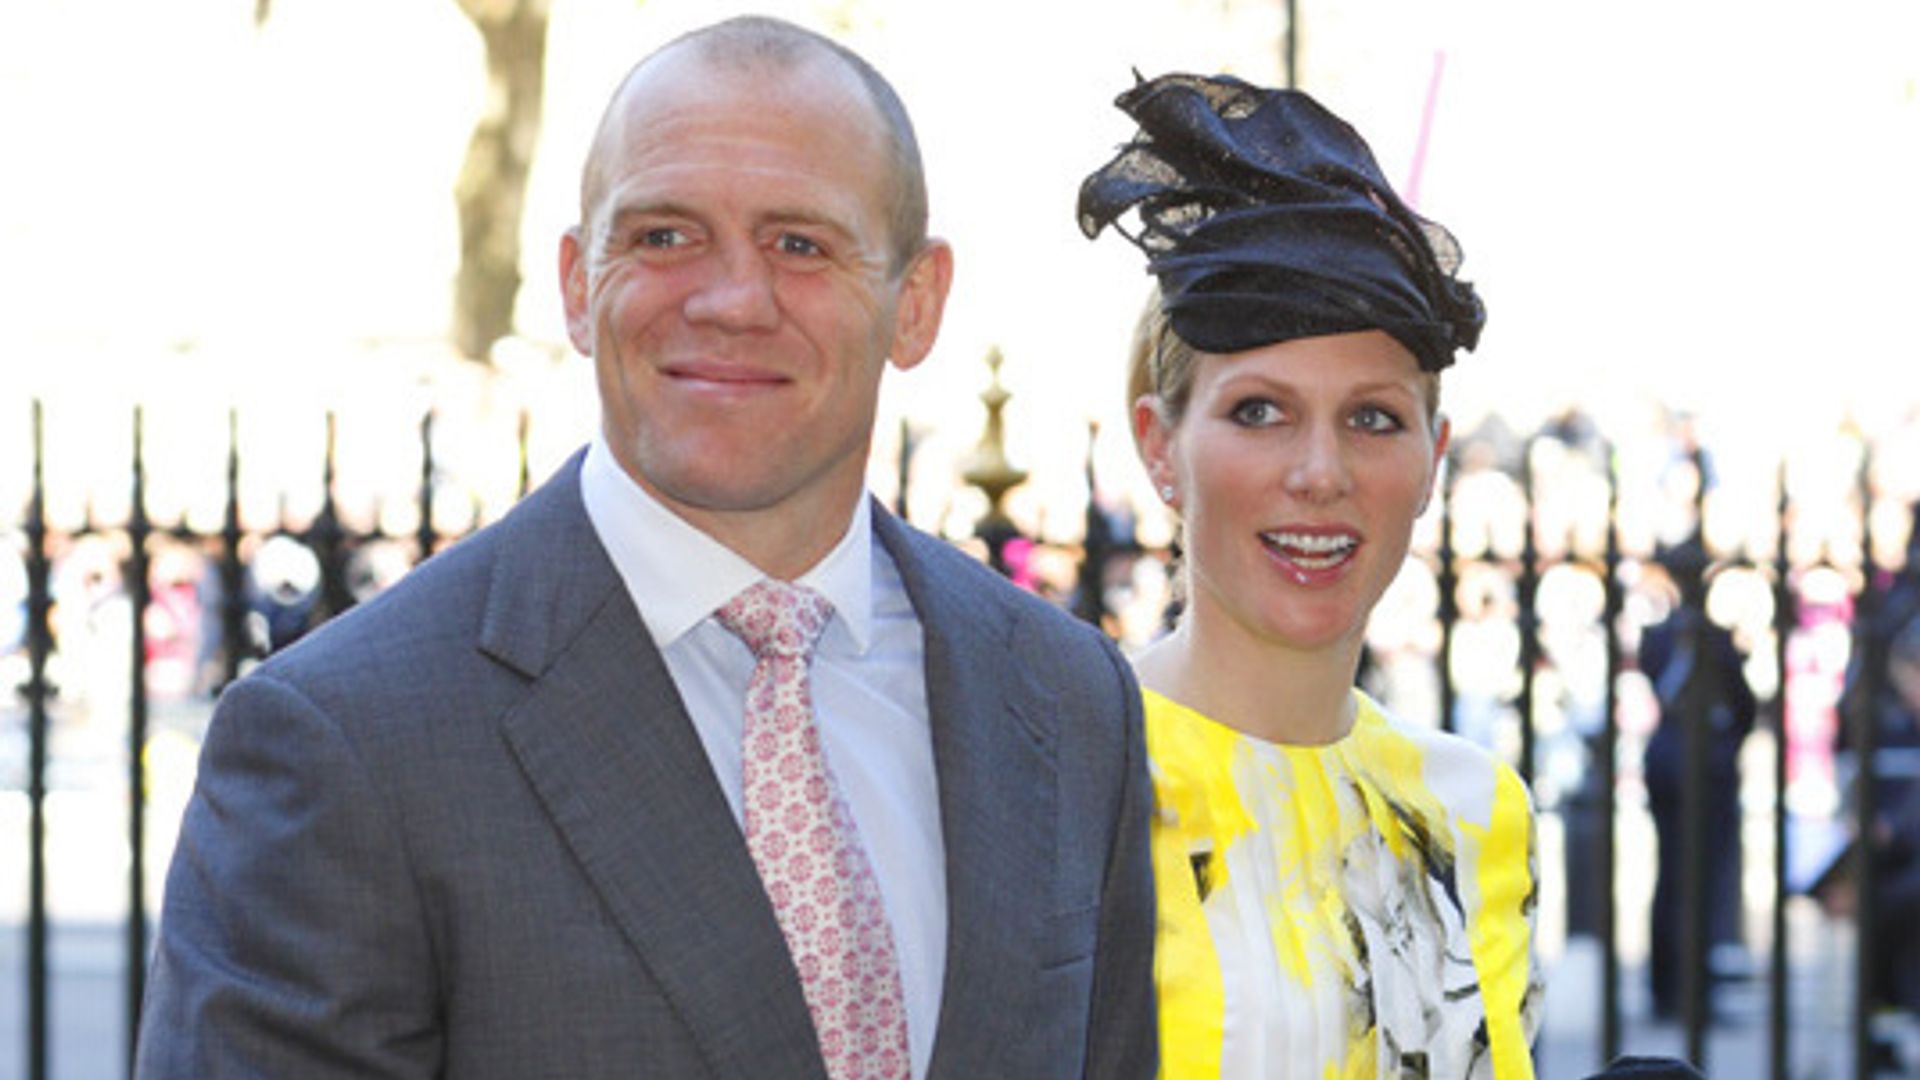 The Queen and Prince William attend the christening for Zara Phillips’ baby